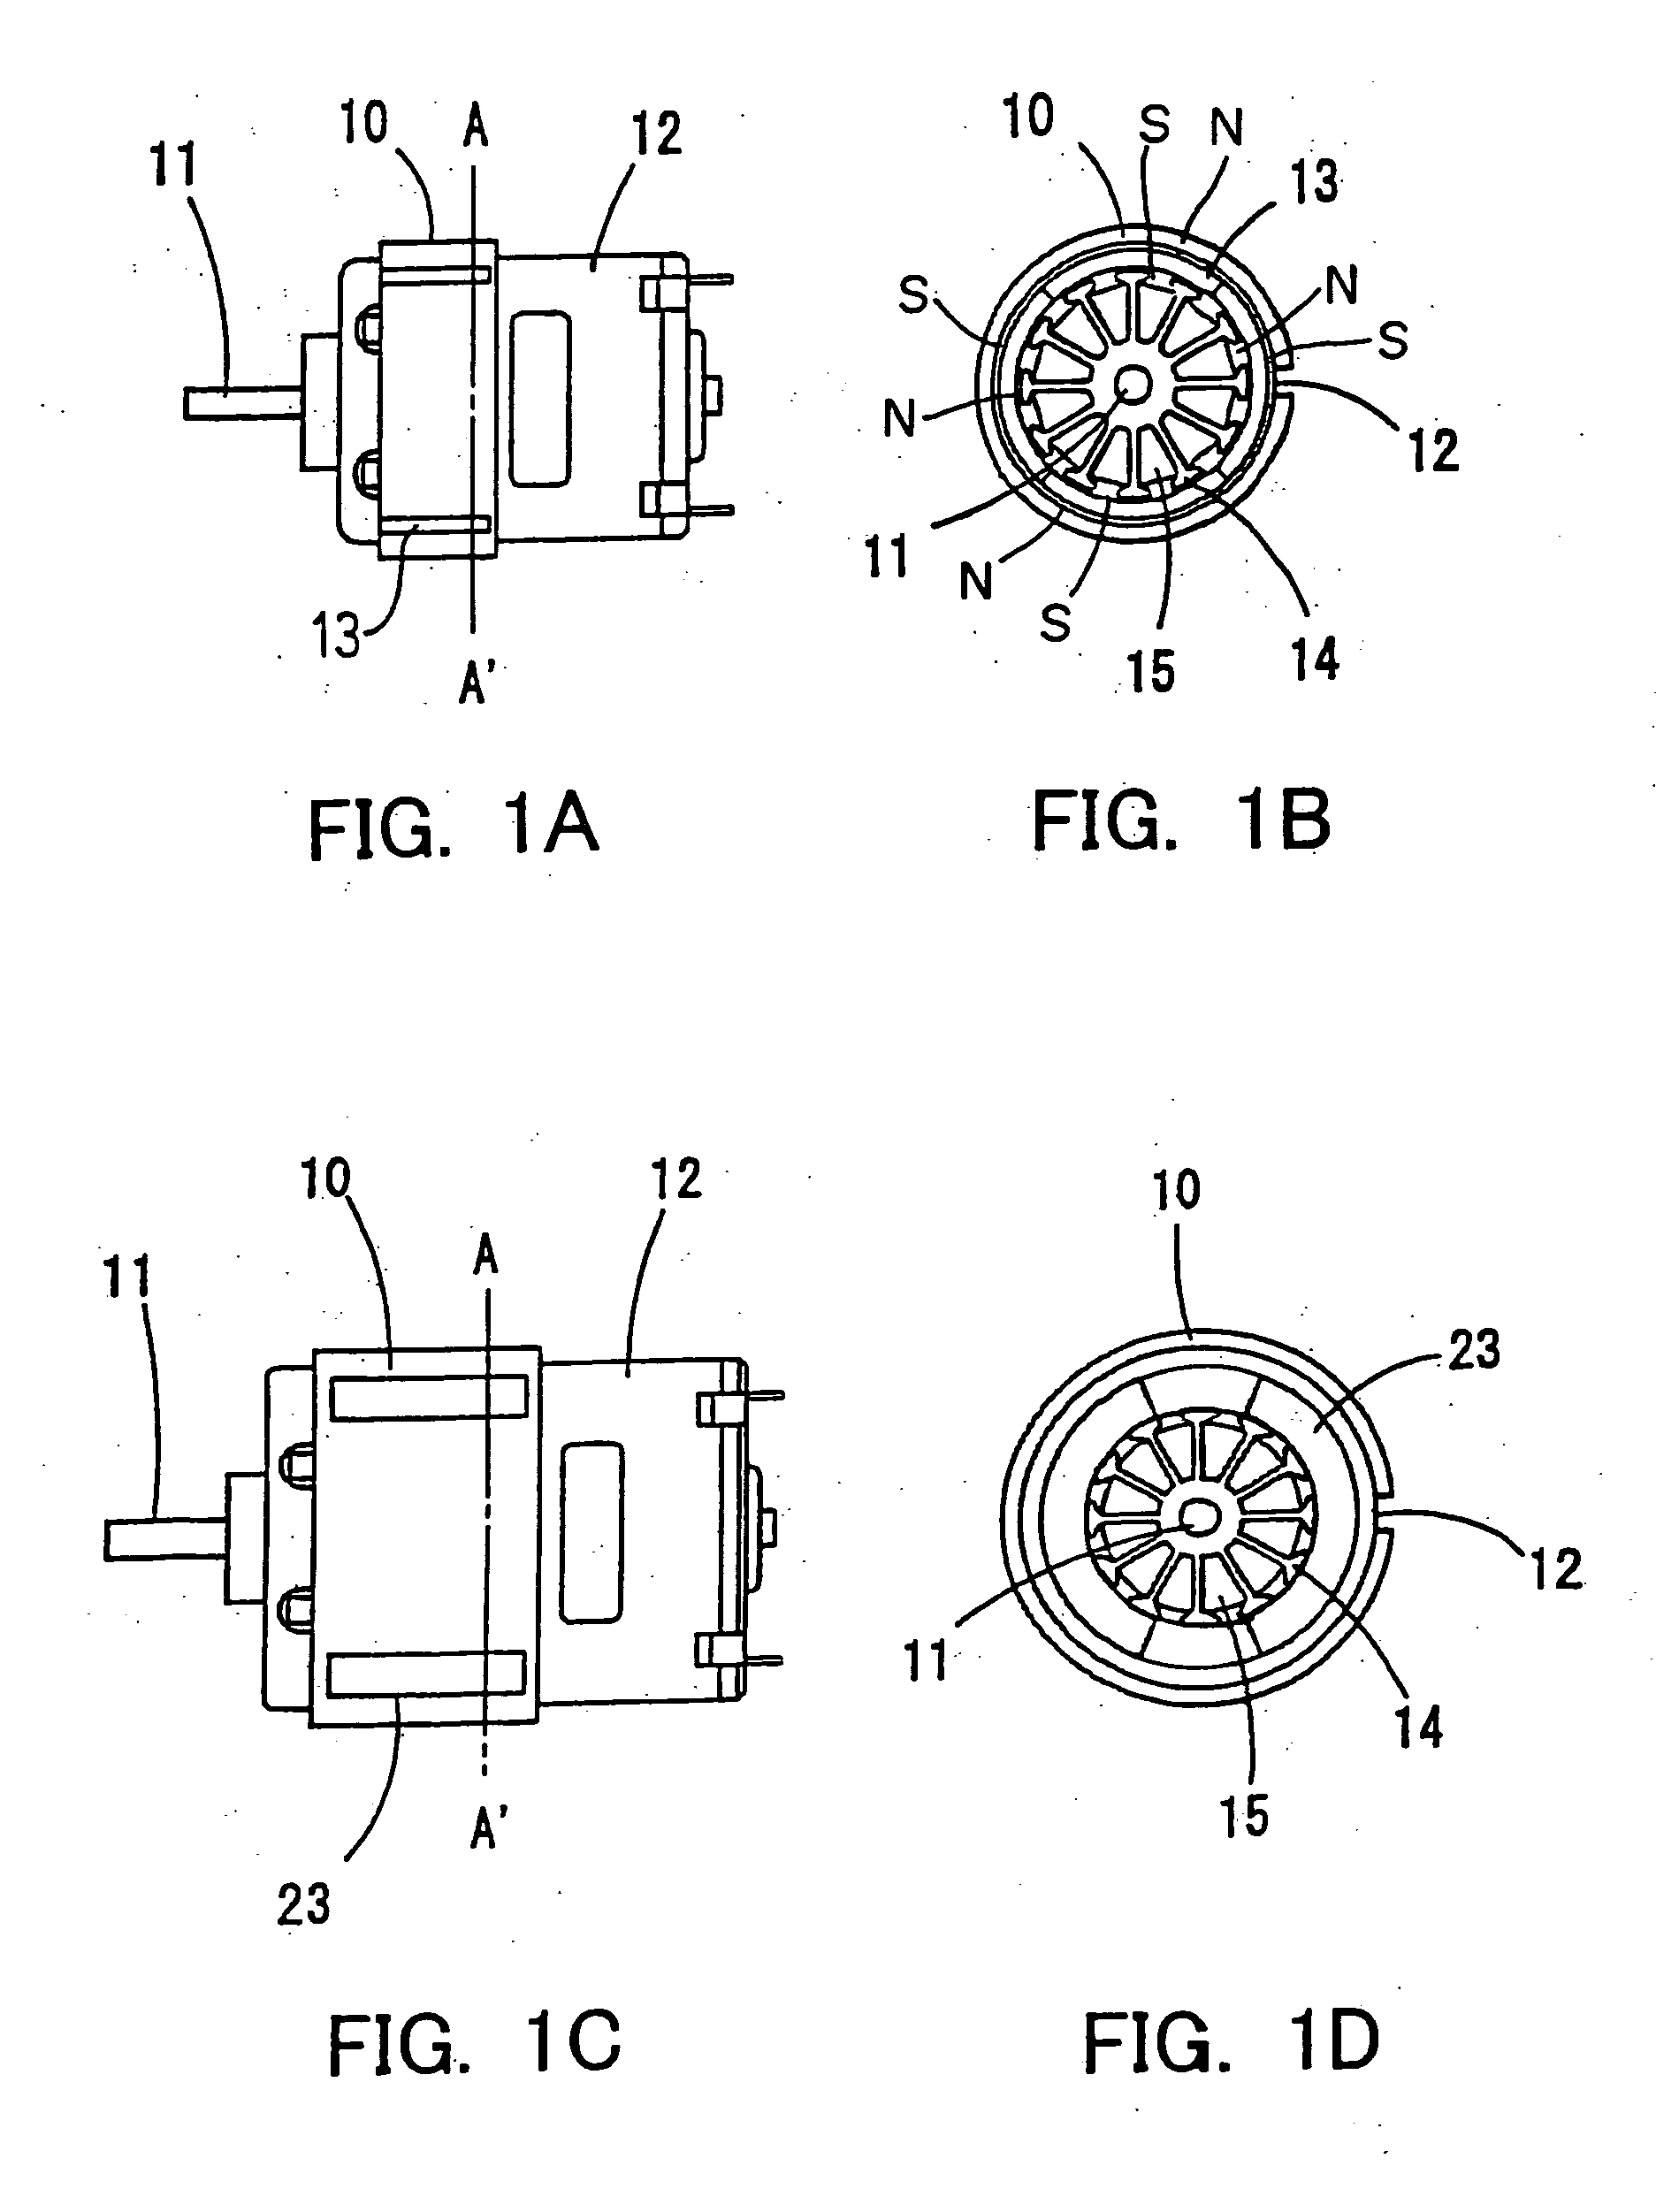 Motor and its permanent magnet